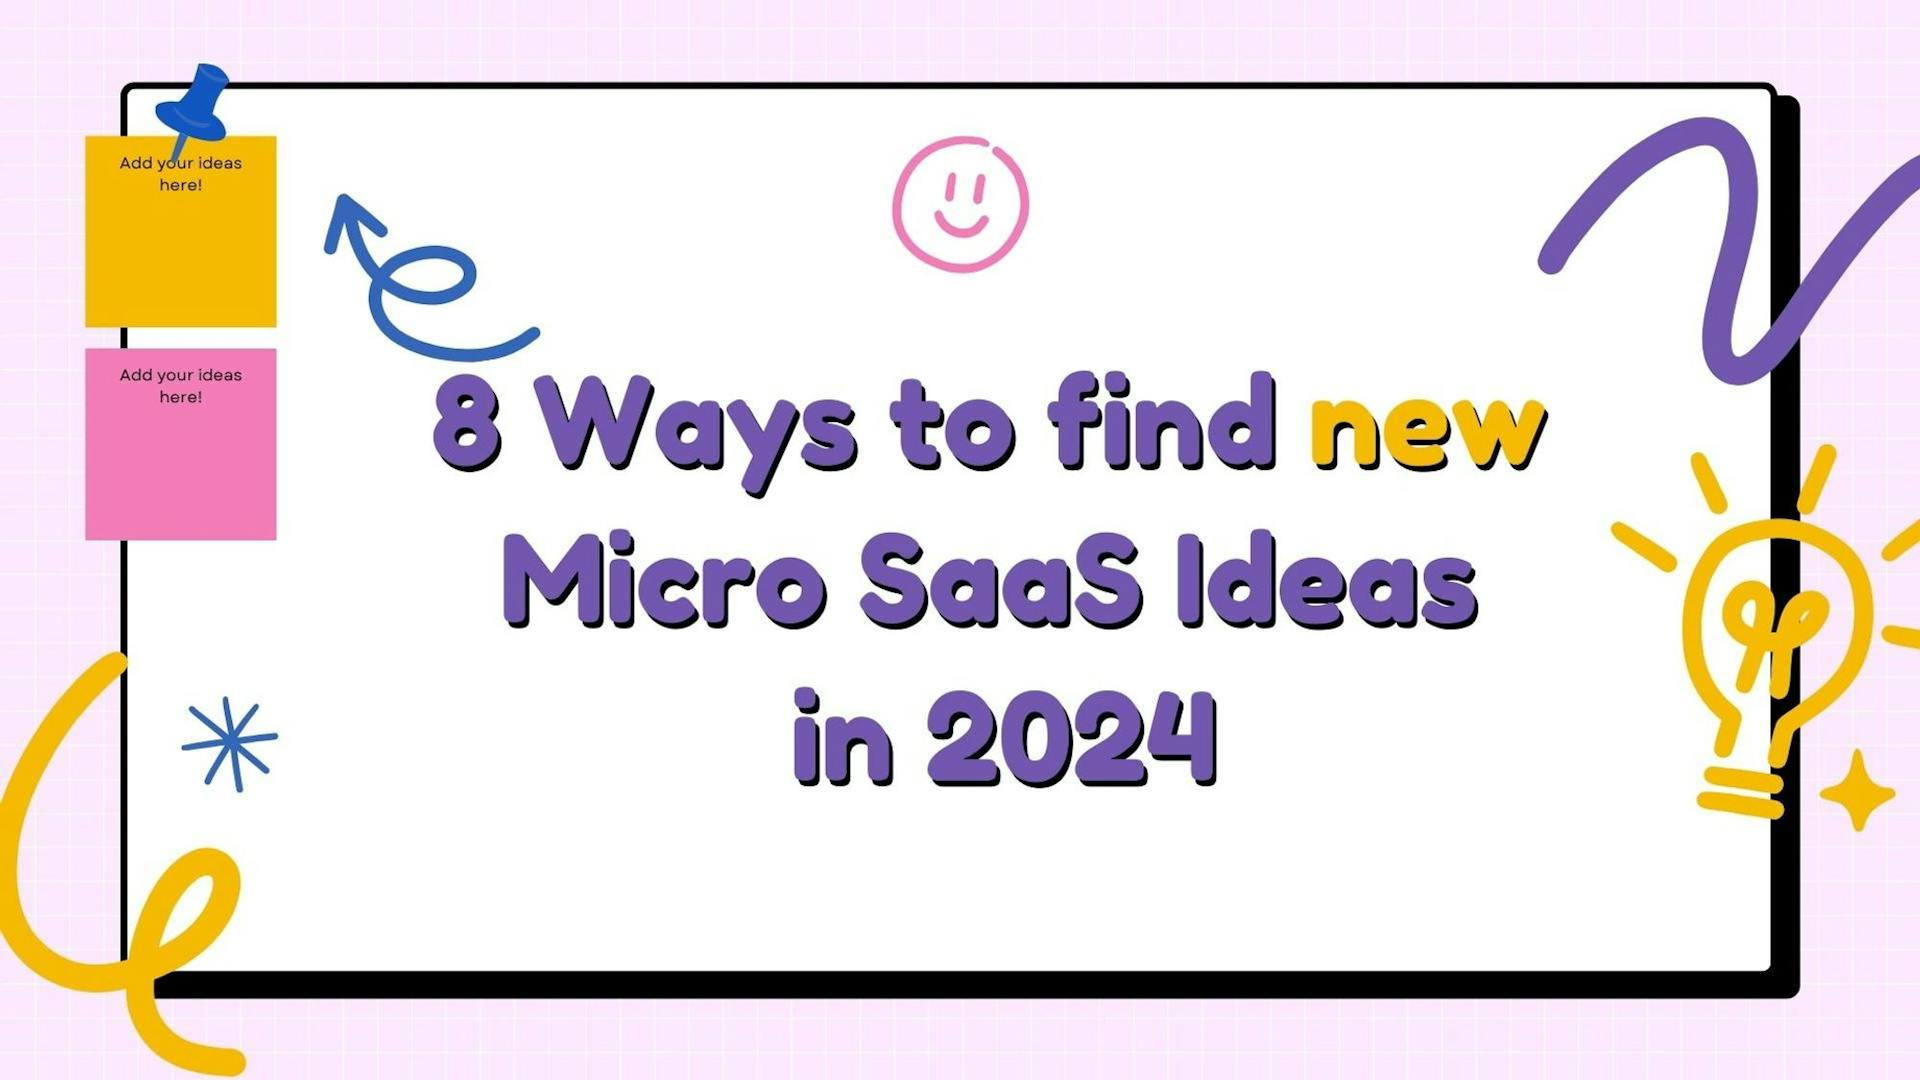 Cover Image for 8 Ways to find new Micro SaaS Ideas in 2024